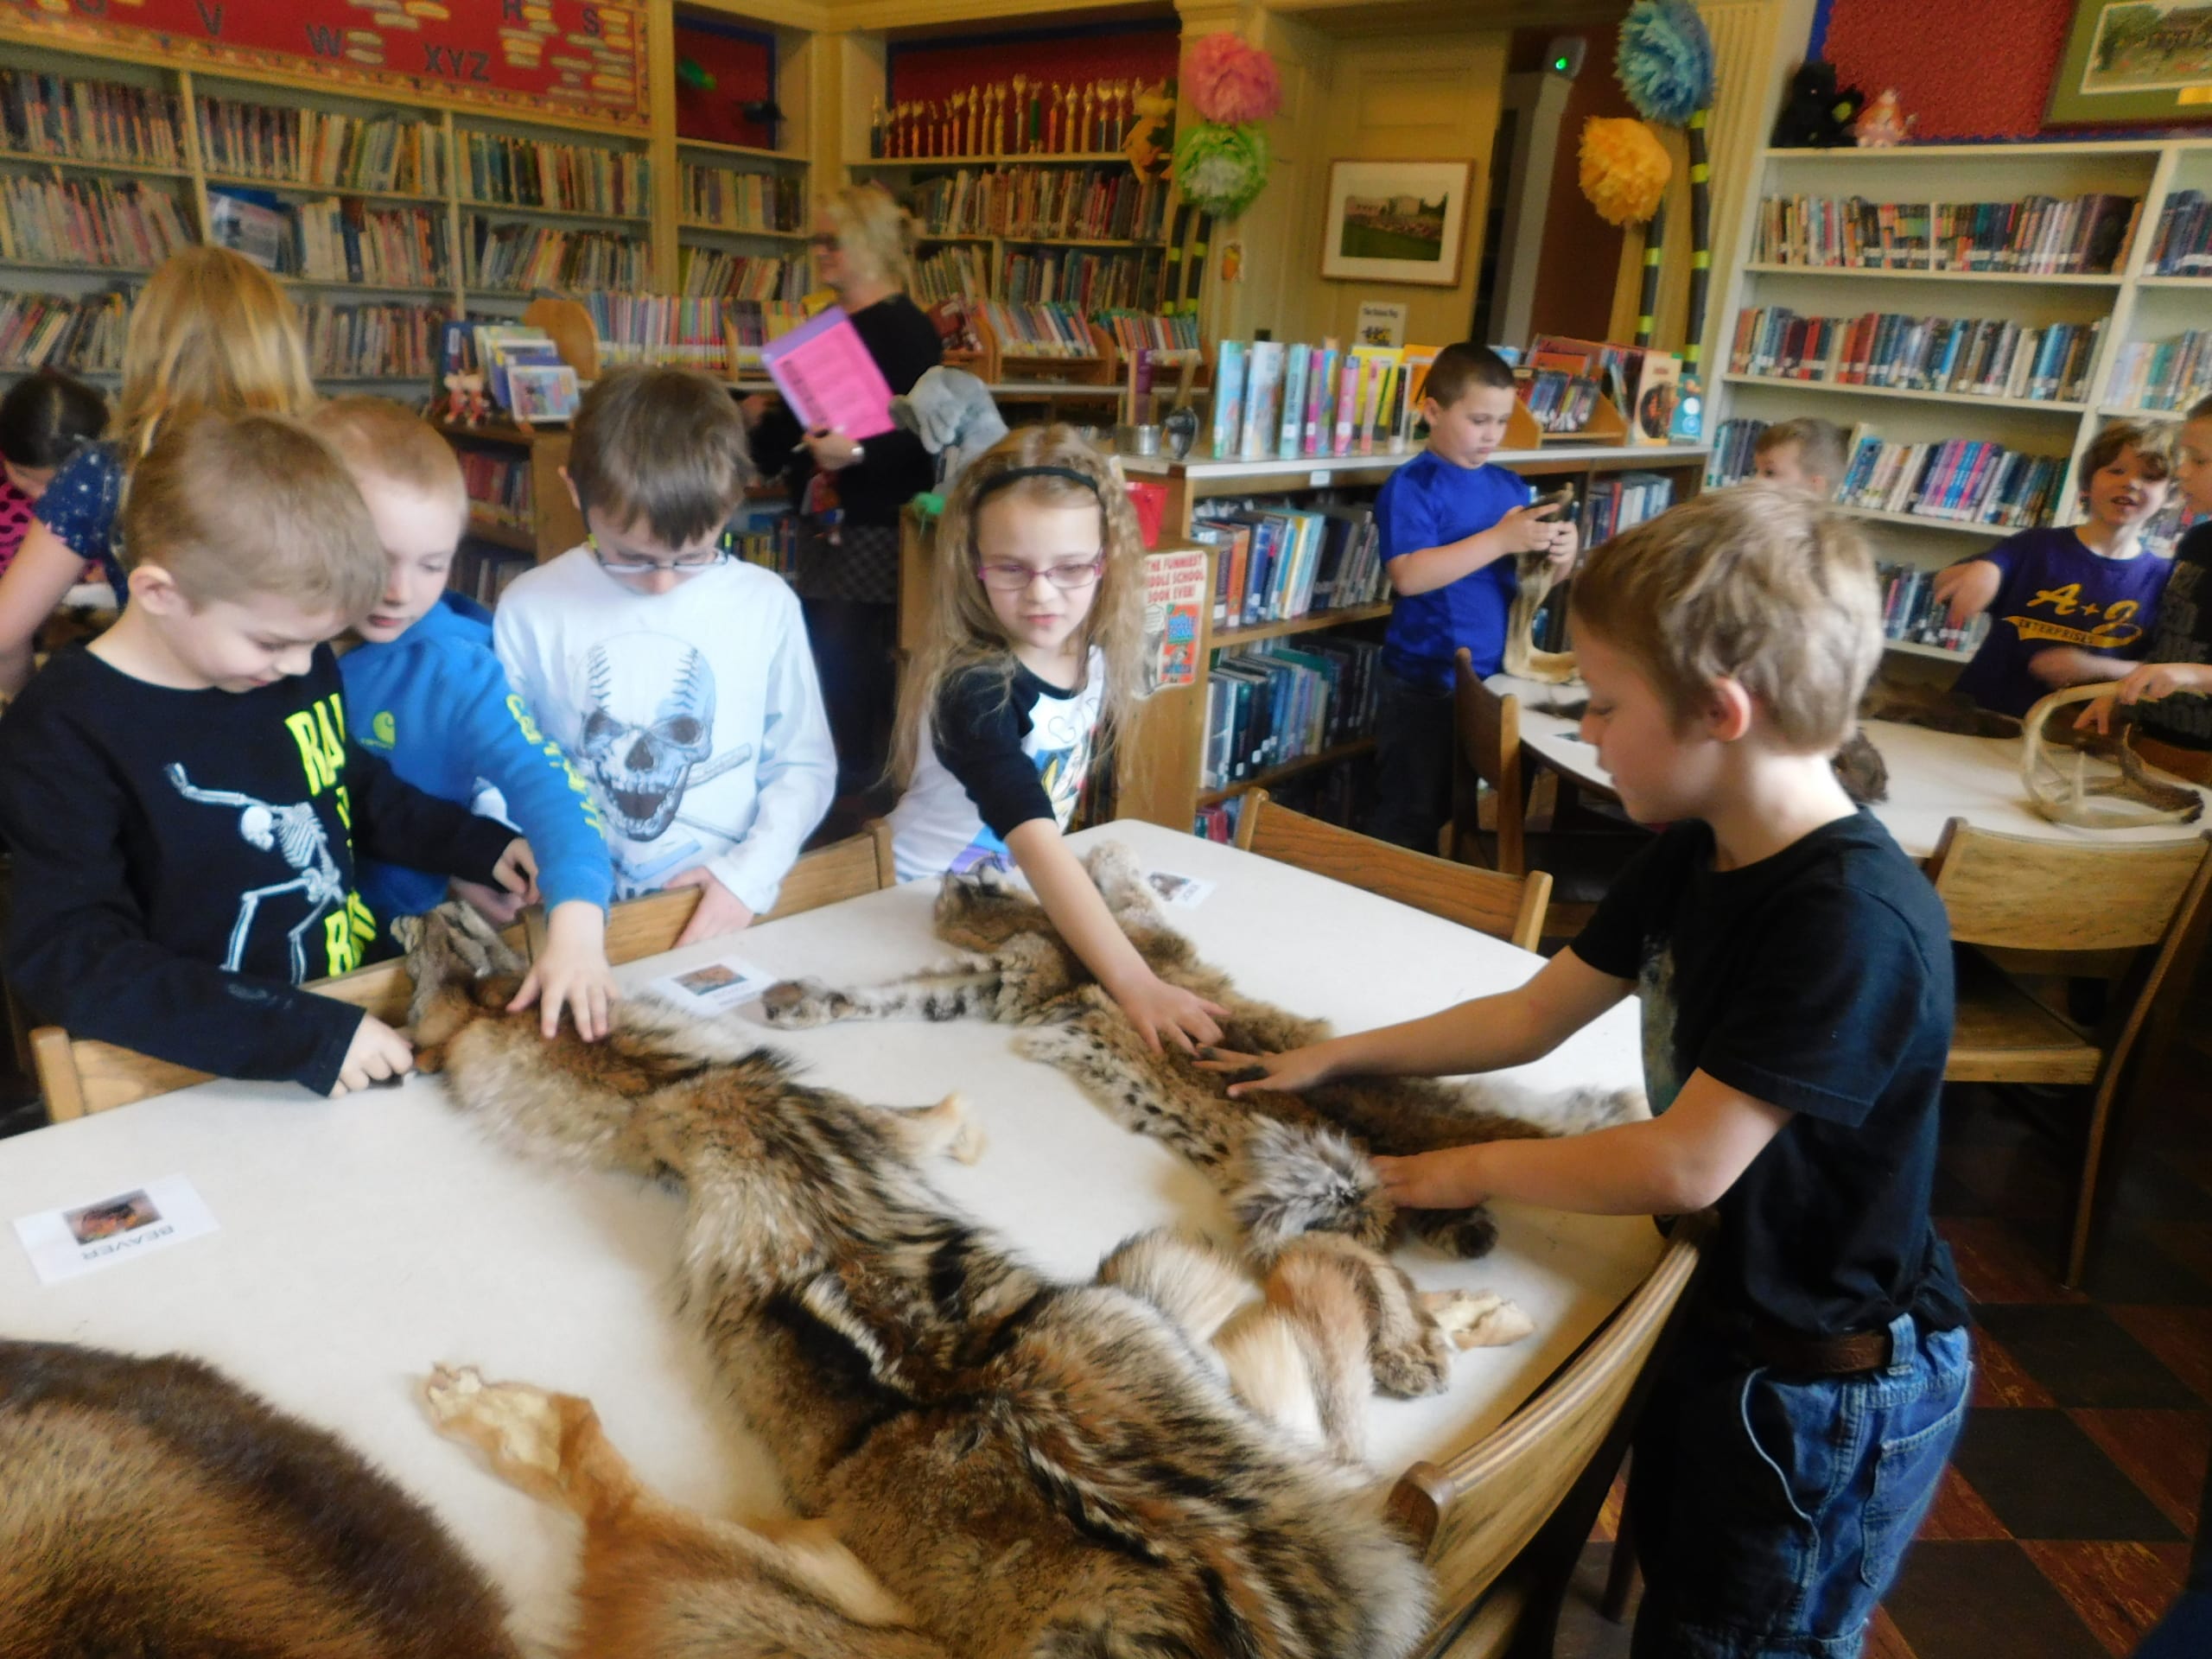 A group of young students in their school library petting the fur of various animal pelts, brought to their school for educational purposes through the ADKX Outreach Program.